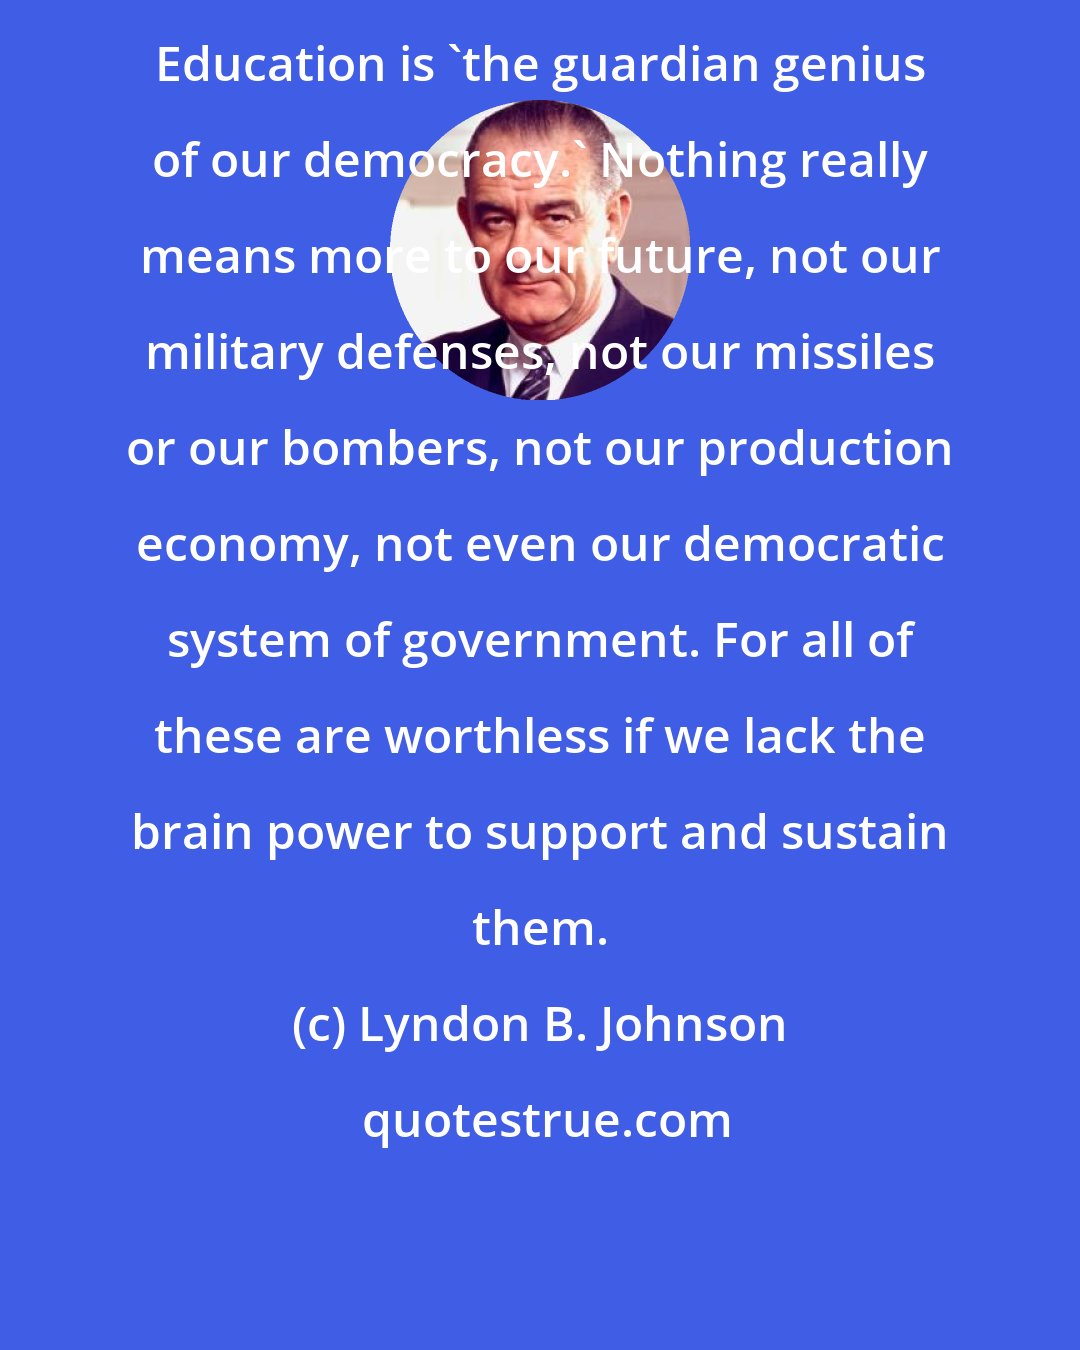 Lyndon B. Johnson: Education is 'the guardian genius of our democracy.' Nothing really means more to our future, not our military defenses, not our missiles or our bombers, not our production economy, not even our democratic system of government. For all of these are worthless if we lack the brain power to support and sustain them.